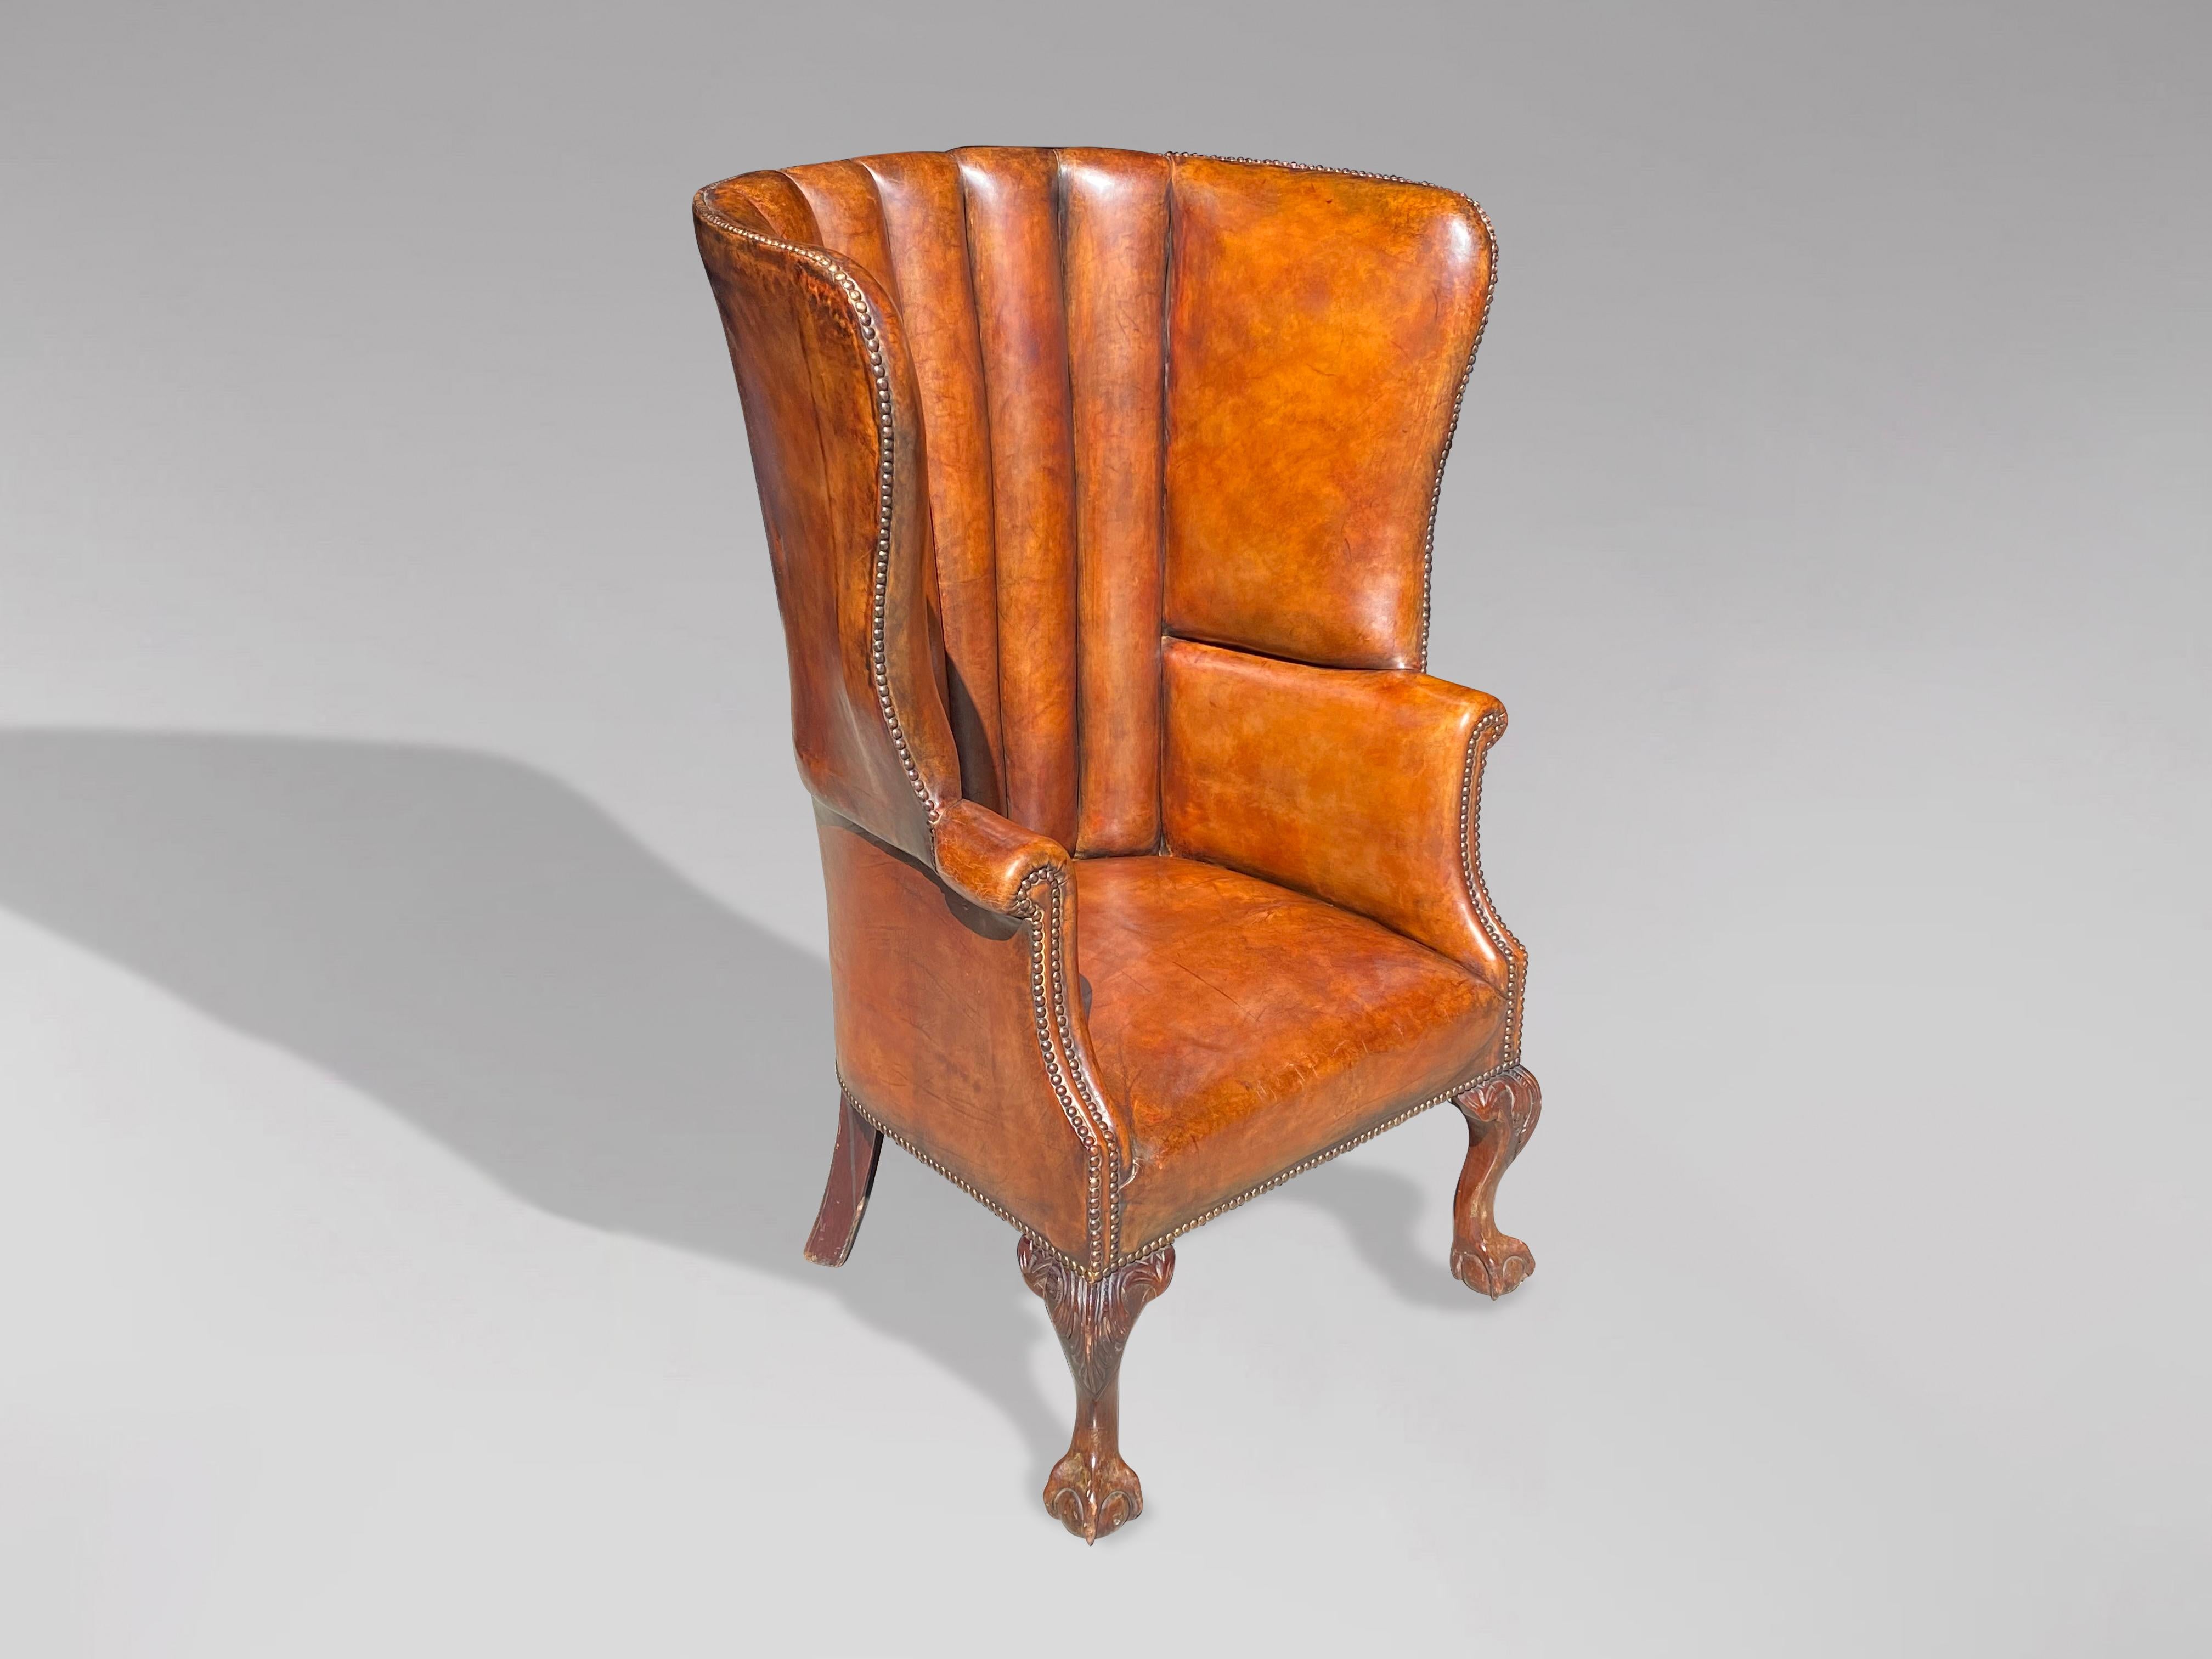 A late 19th century good quality English golden brown leather barrel back armchair with beautifully shaped back with brass studwork, all standing on mahogany front cabriole ball-and-claw feet. Warm rich colour and patina! Very comfortable seating.